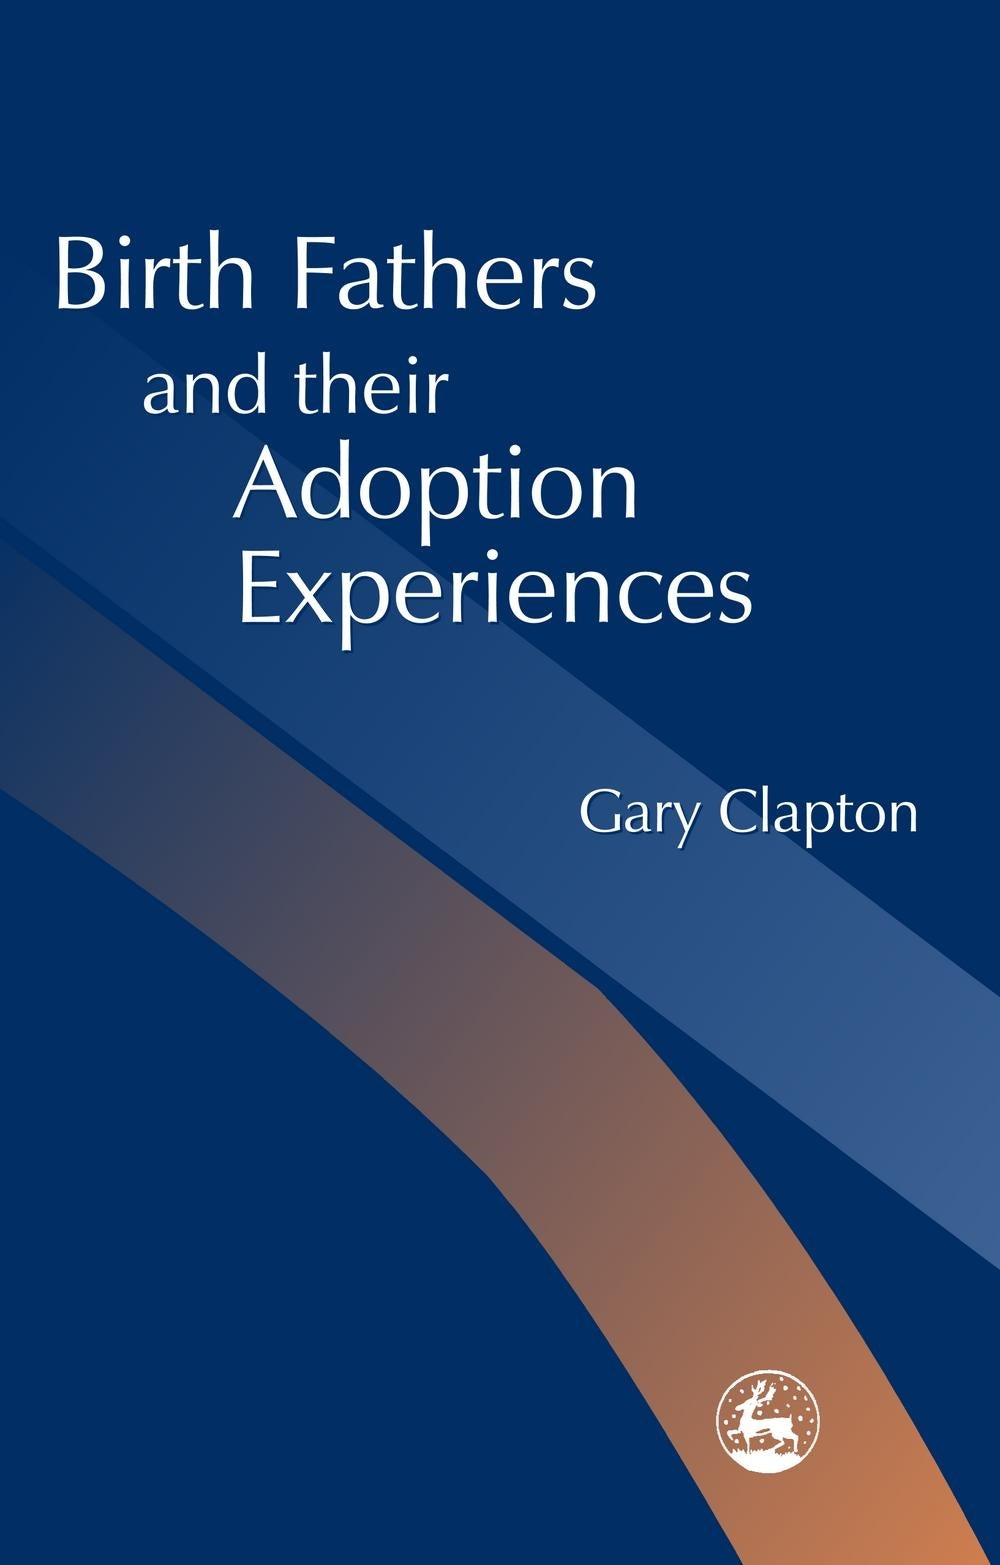 Birth Fathers and their Adoption Experiences by Gary Clapton